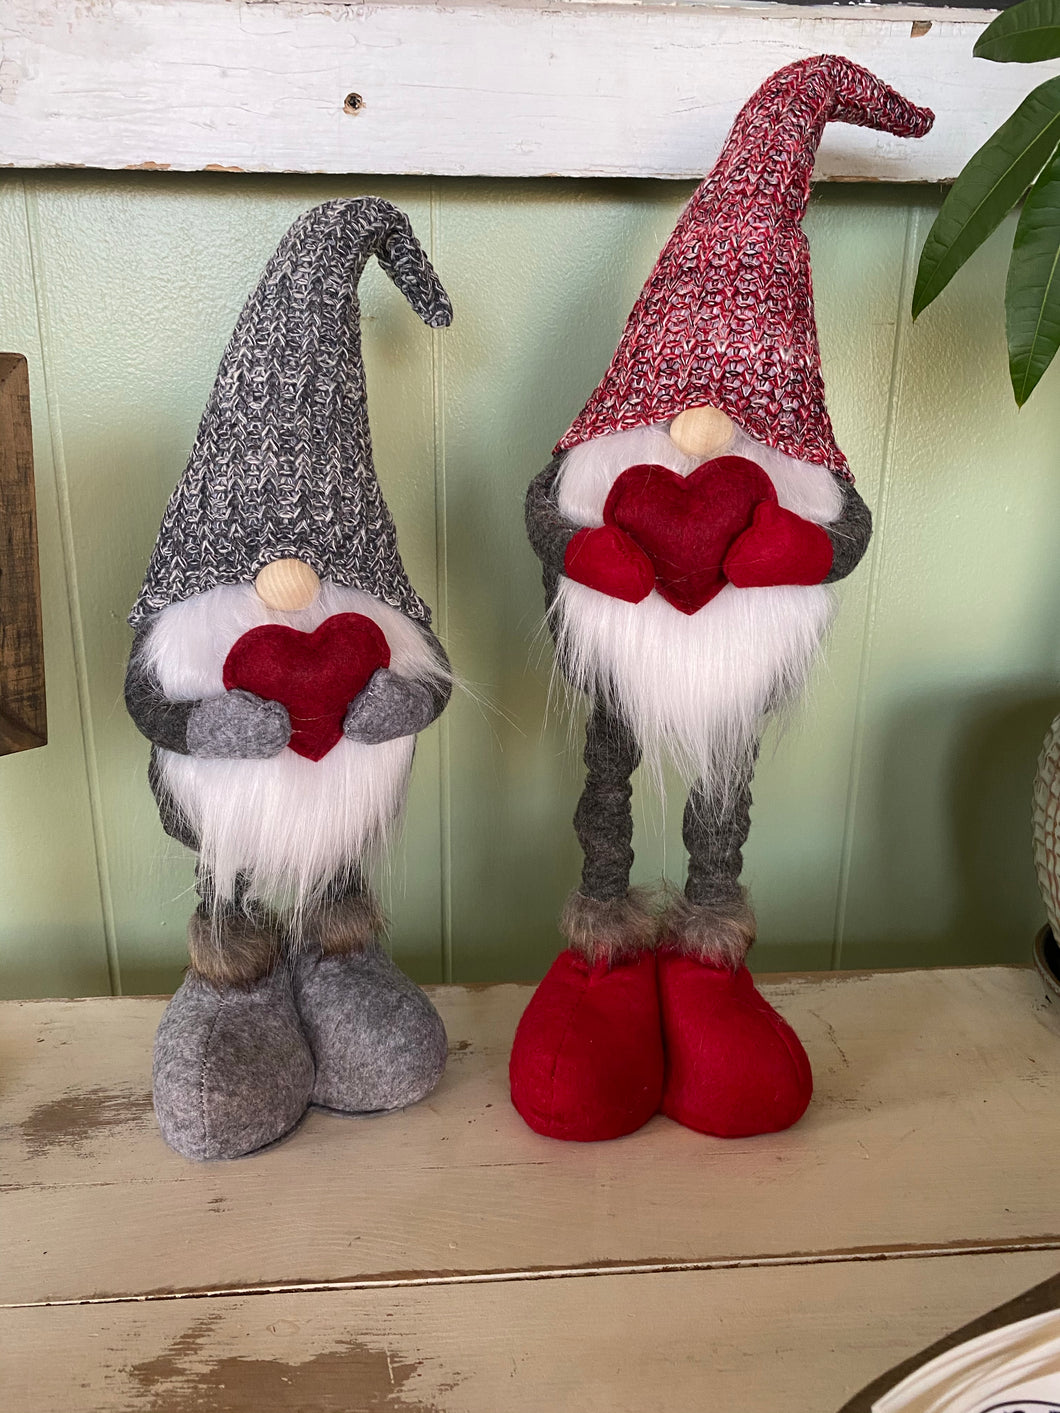 Extendable love “valentines” gnomes